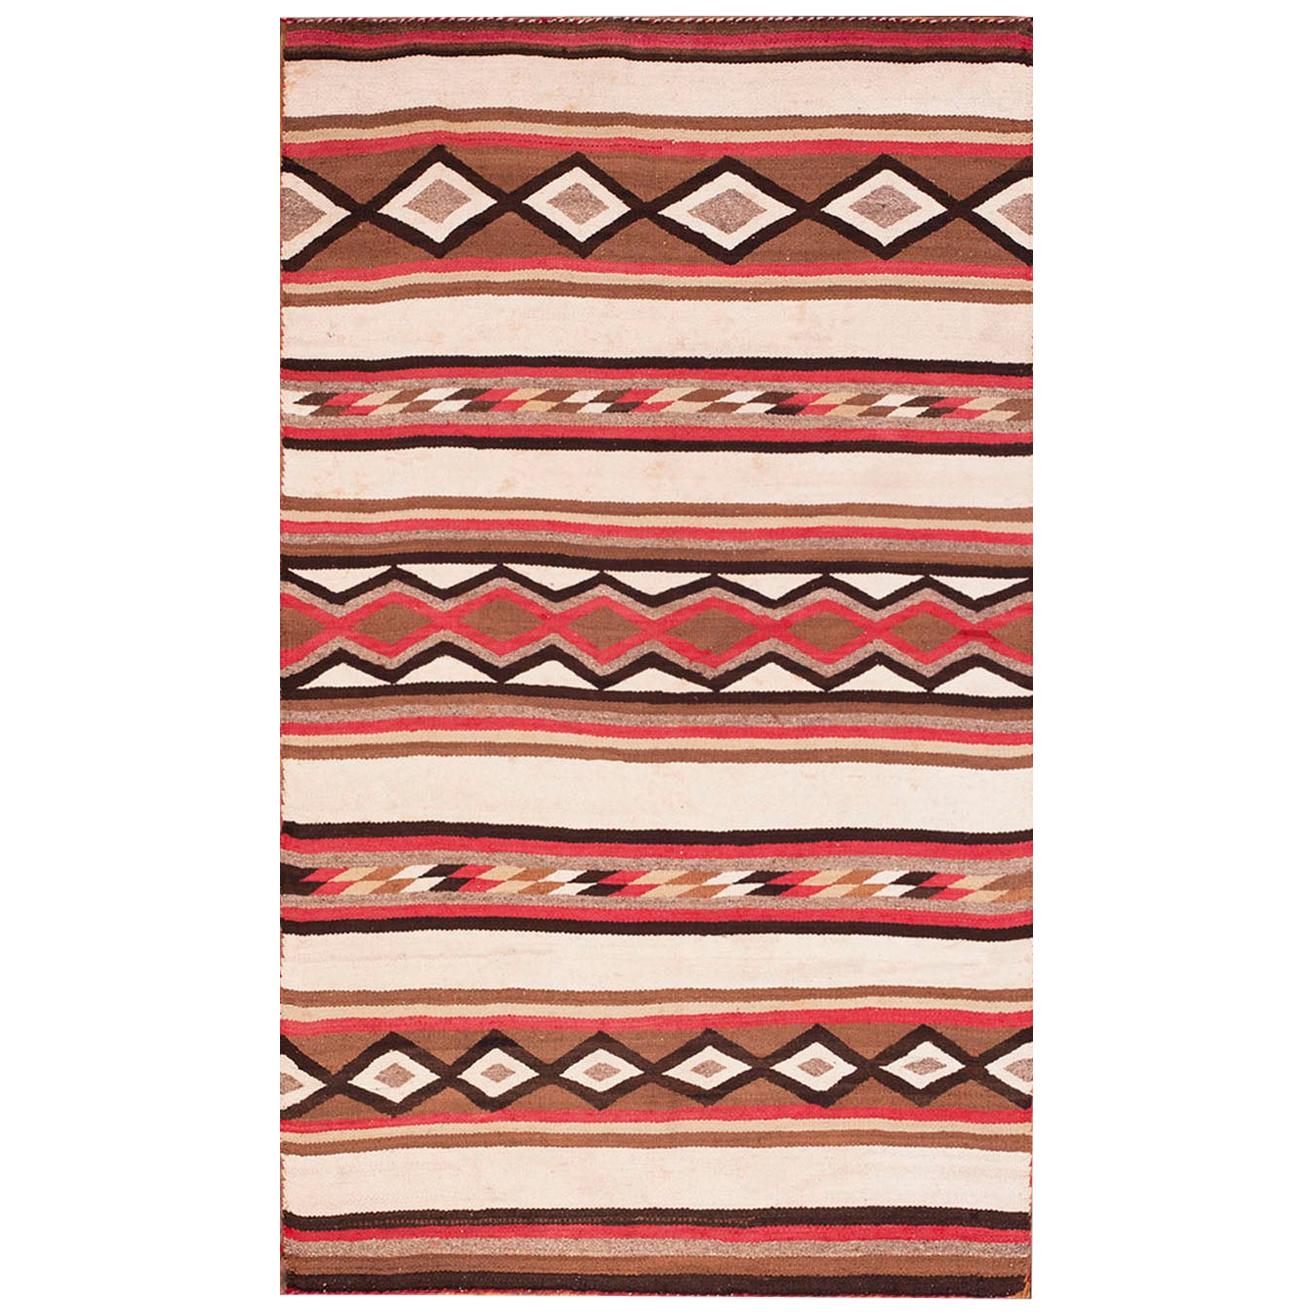 Early 20th Century American Navajo Chinle Wide Ruins Carpet ( 3'6" x 5'9" ) For Sale